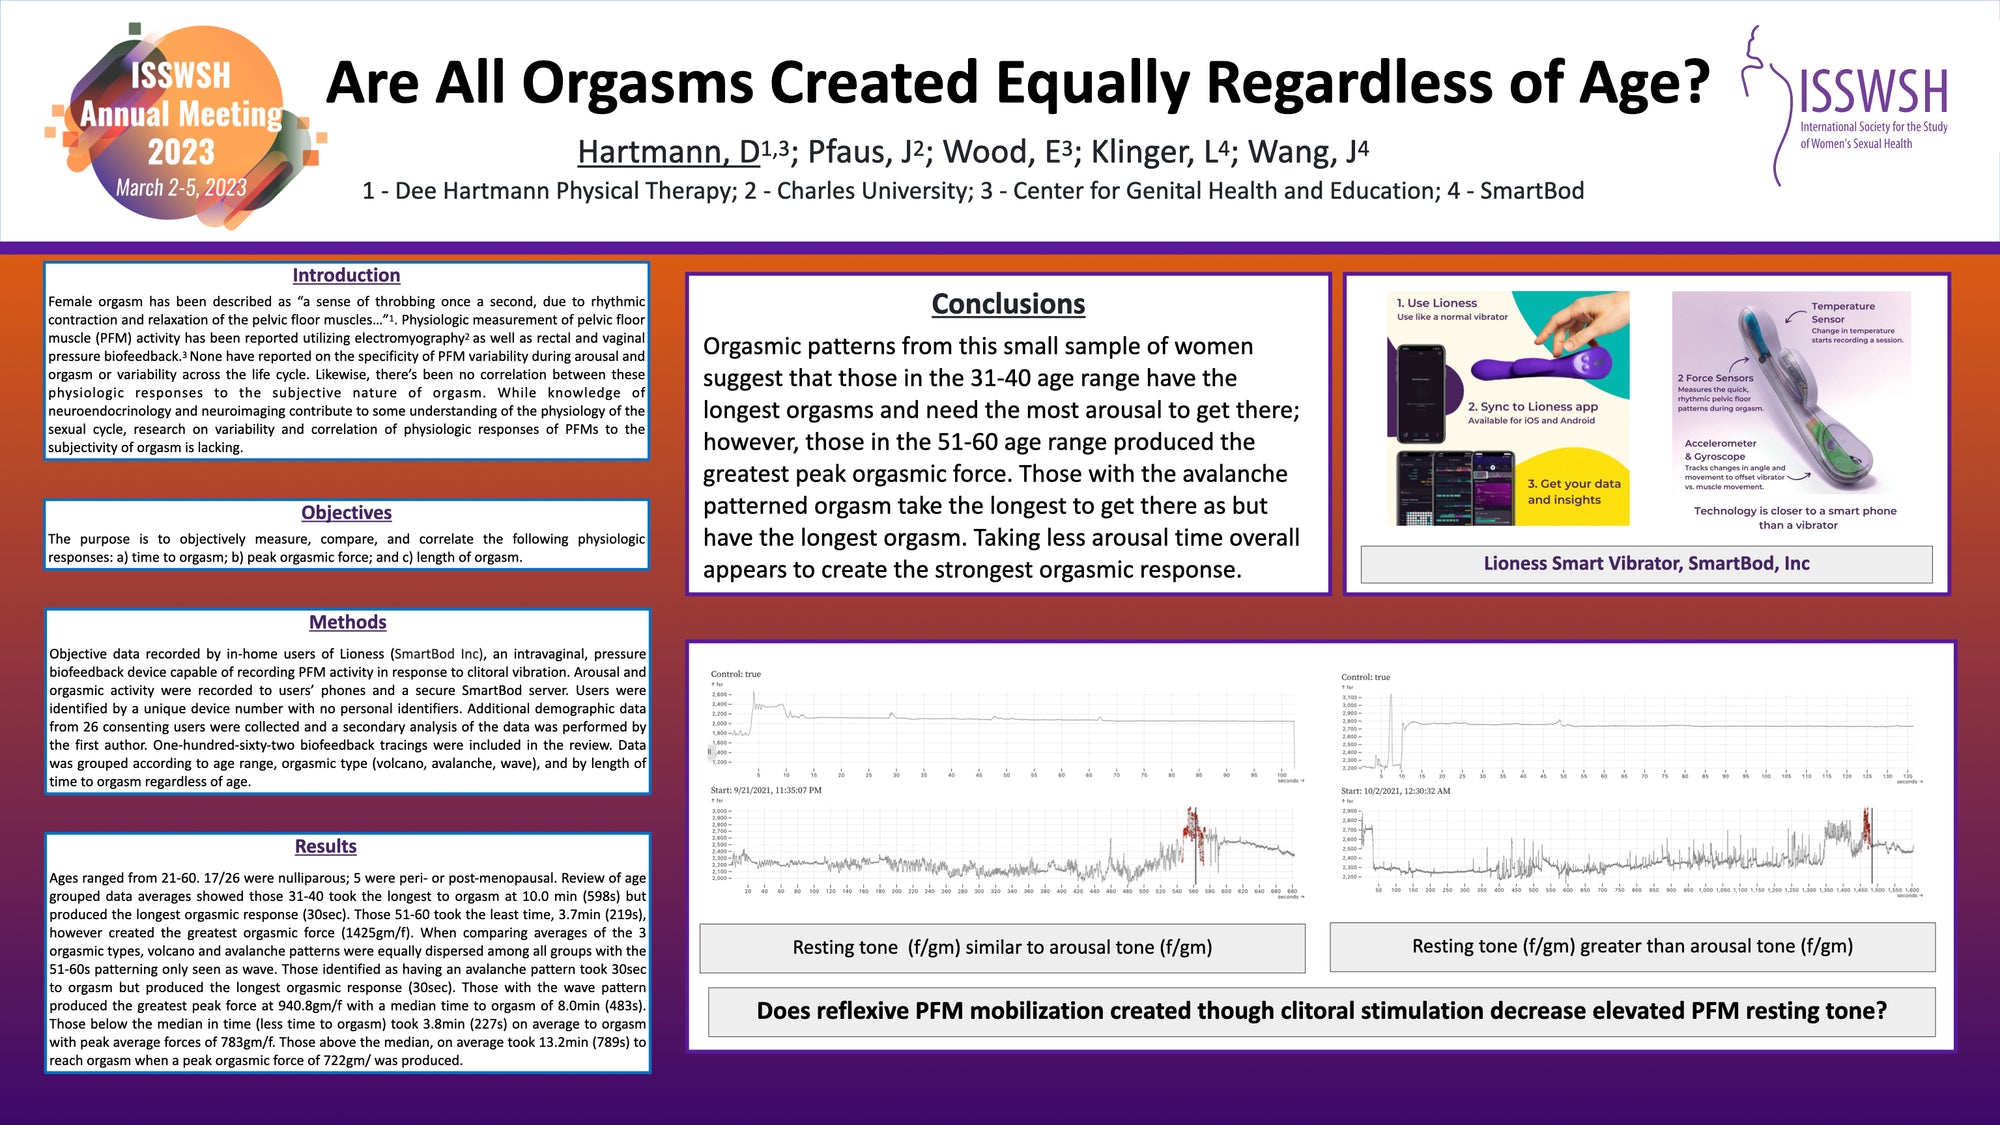 Are All Orgasms Created Equally? 